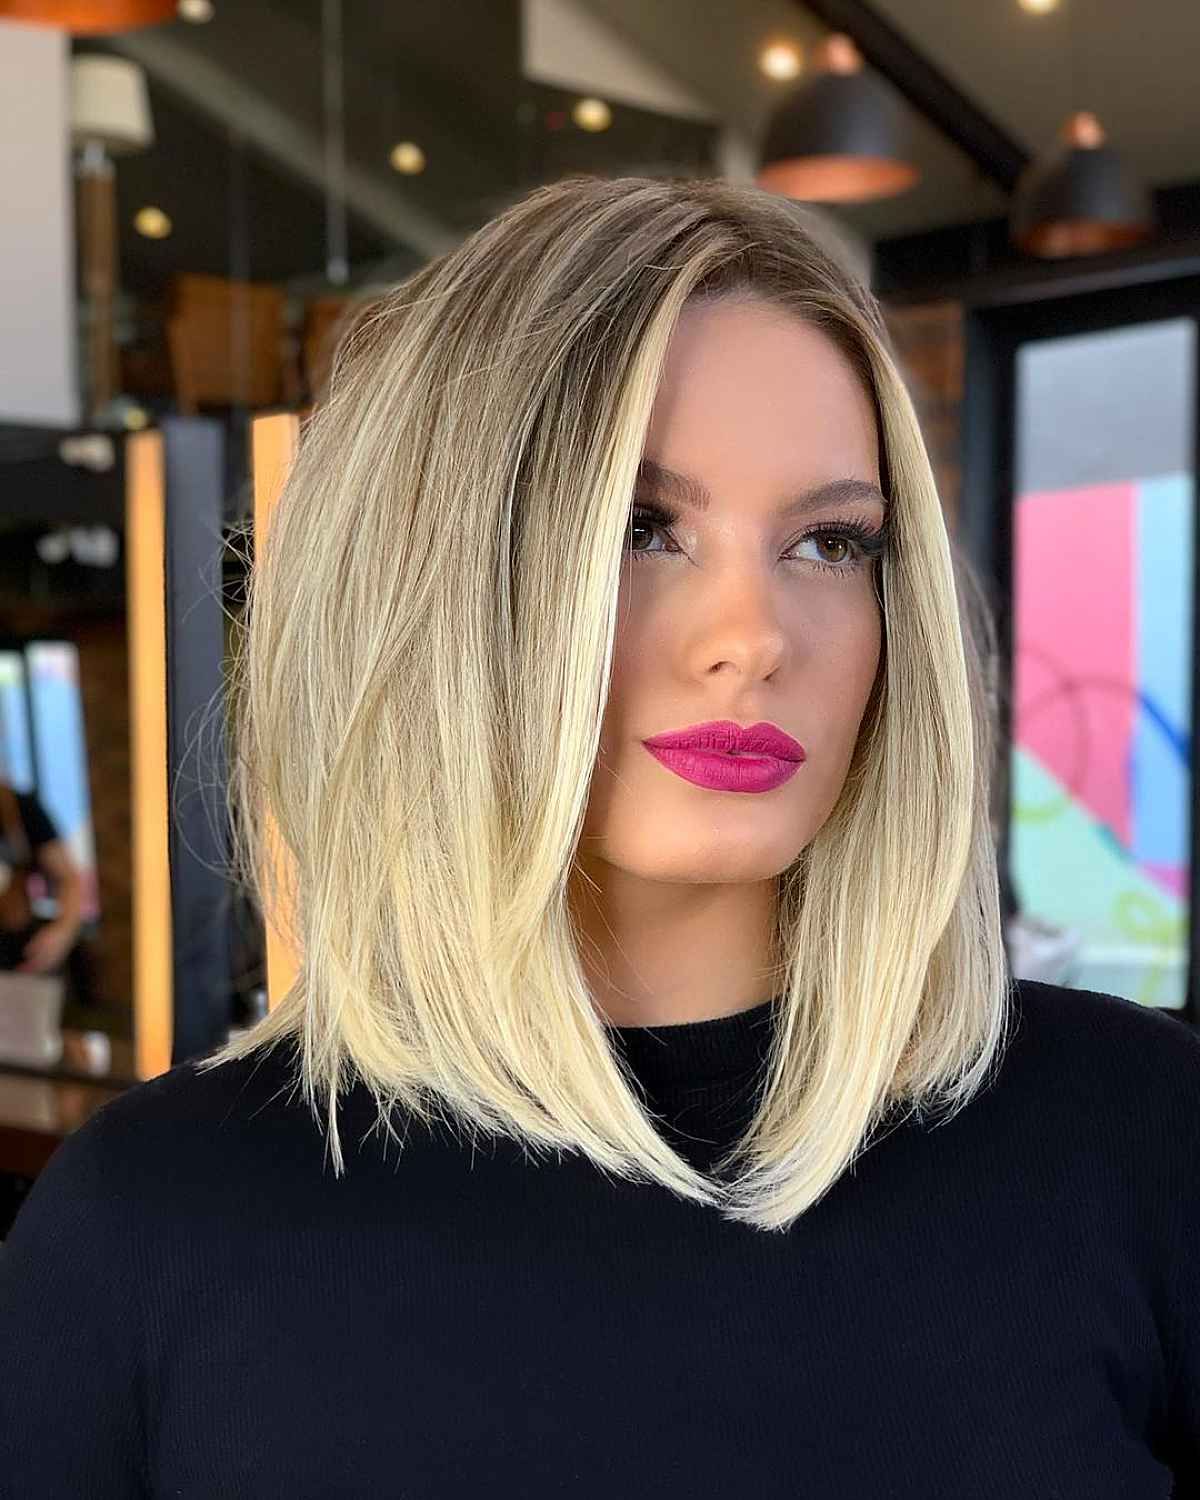 33 Best Long Layered Bob (layered Lob) Hairstyles In 2022 Inside 2018 Lob Haircuts With Swoopy Face Framing Layers (View 2 of 25)